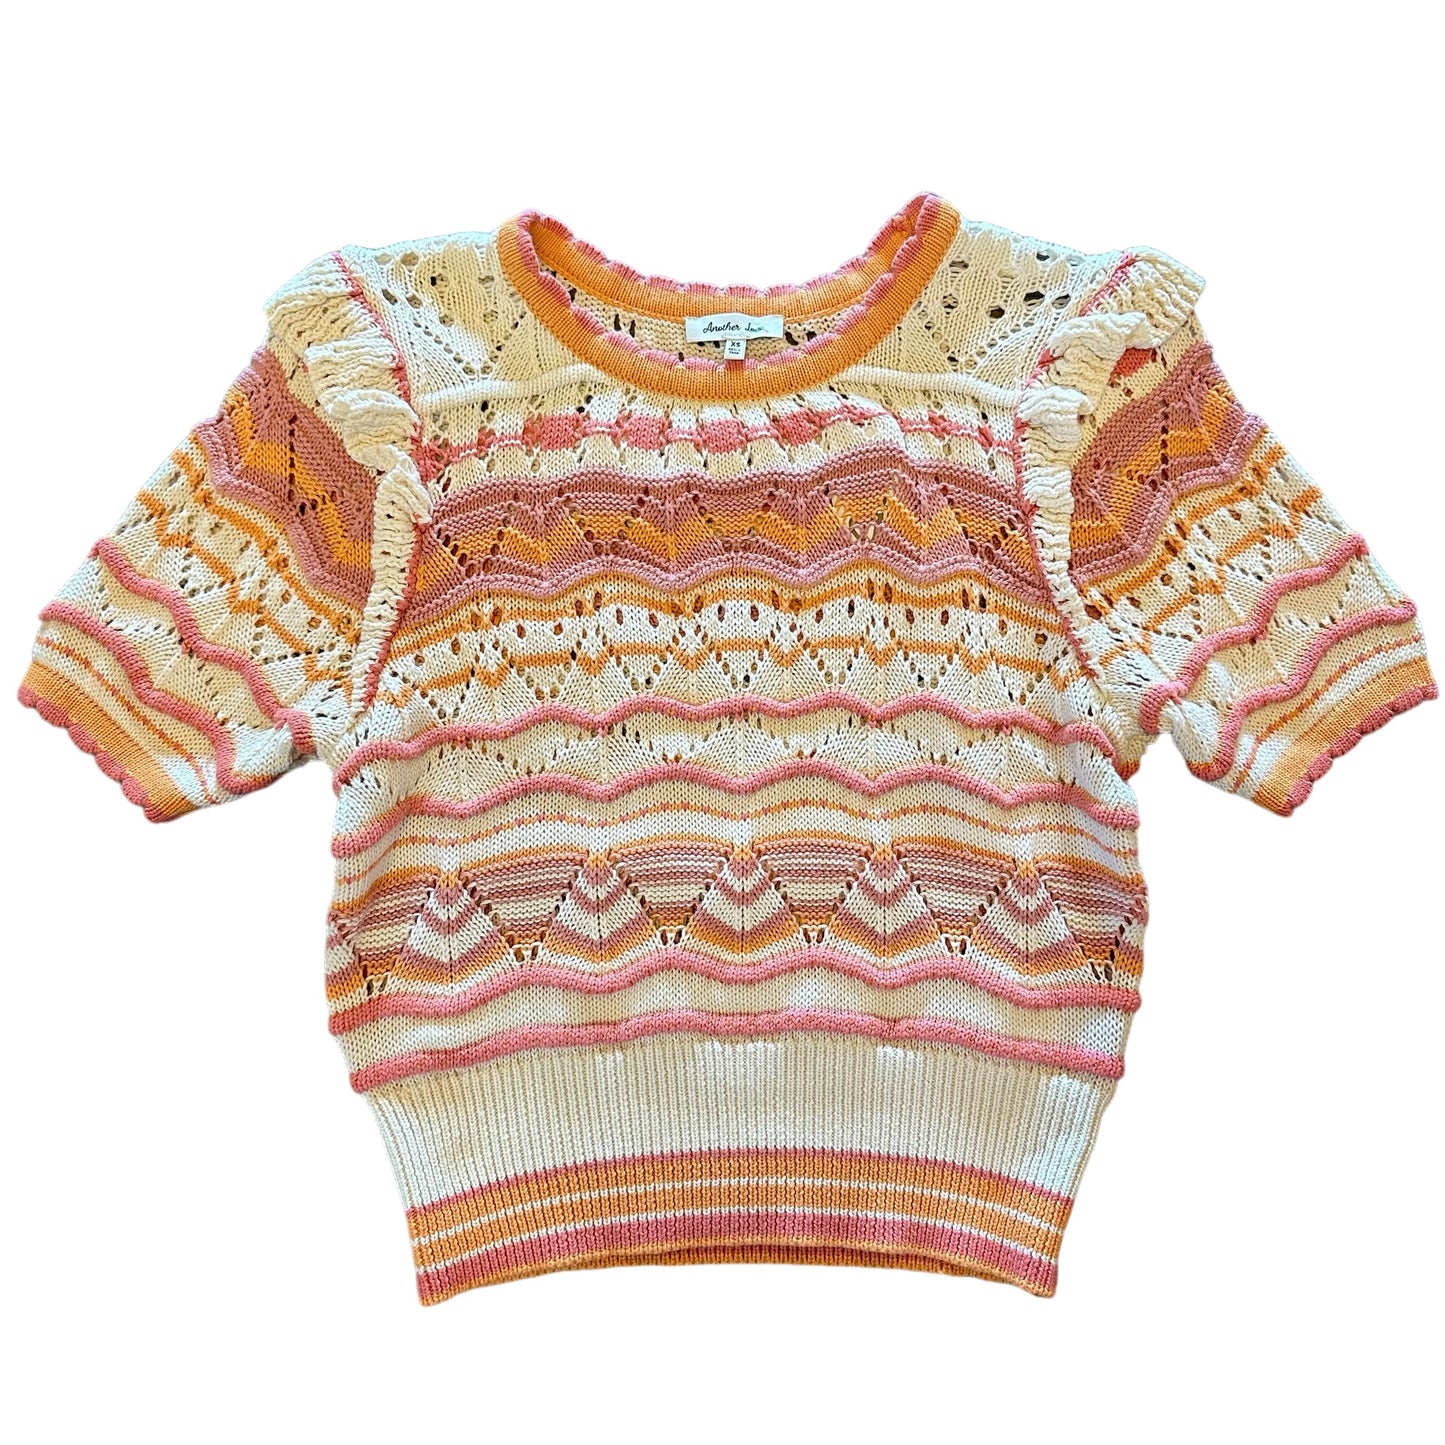 Neve Crochet Crew Neck Sweater in grapefruit abstract by Another Love